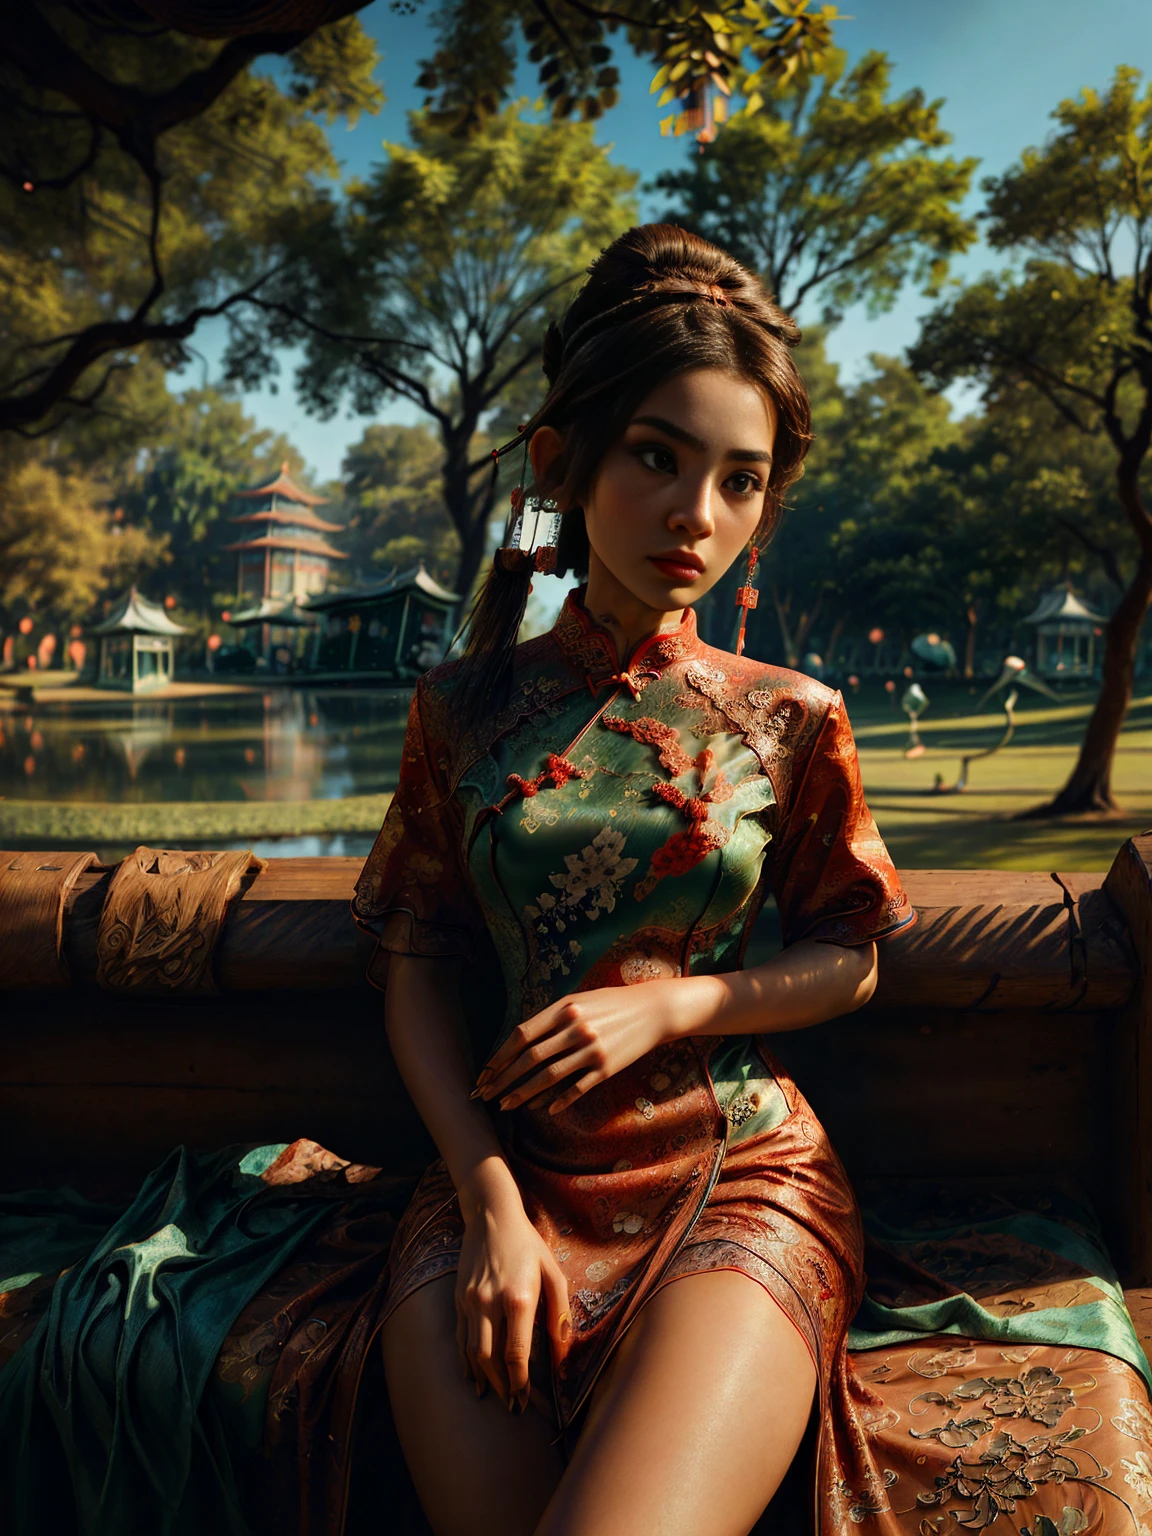 ((a detailed beautiful girl with Cheongsam in Cantonese, It is a type of female dress of Manchu origin used in China green park:1.5)), detailed eyes, detailed face, long eyelashes, detailed hair and updo elegant and beautiful elegantly dressed, sitting on a bench under a tree, sunlight splashing on the leaves, vibrant colors, photorealistic, 8K, high quality, cinematic lighting, portrait, (Best Quality,4k,8K,high resolution,masterpiece:1.2),ultra detailed,sharp focus, Very detailed face,extremely detailed facial features,hyper realista skin texture,extremely fine details,intricate details,detailed eyes,Detailed nose,detailed lips,Detailed facial expressions,intricate facial anatomy,intense lighting, dramatic lighting,Changing lighting,cinematic lighting,chiaroscuro lighting,dramatic shadows,dramatic moments,vivid colors,intense colours,Deep contrast,cinematic depth of field,cinematographic composition,cinematic camera angle